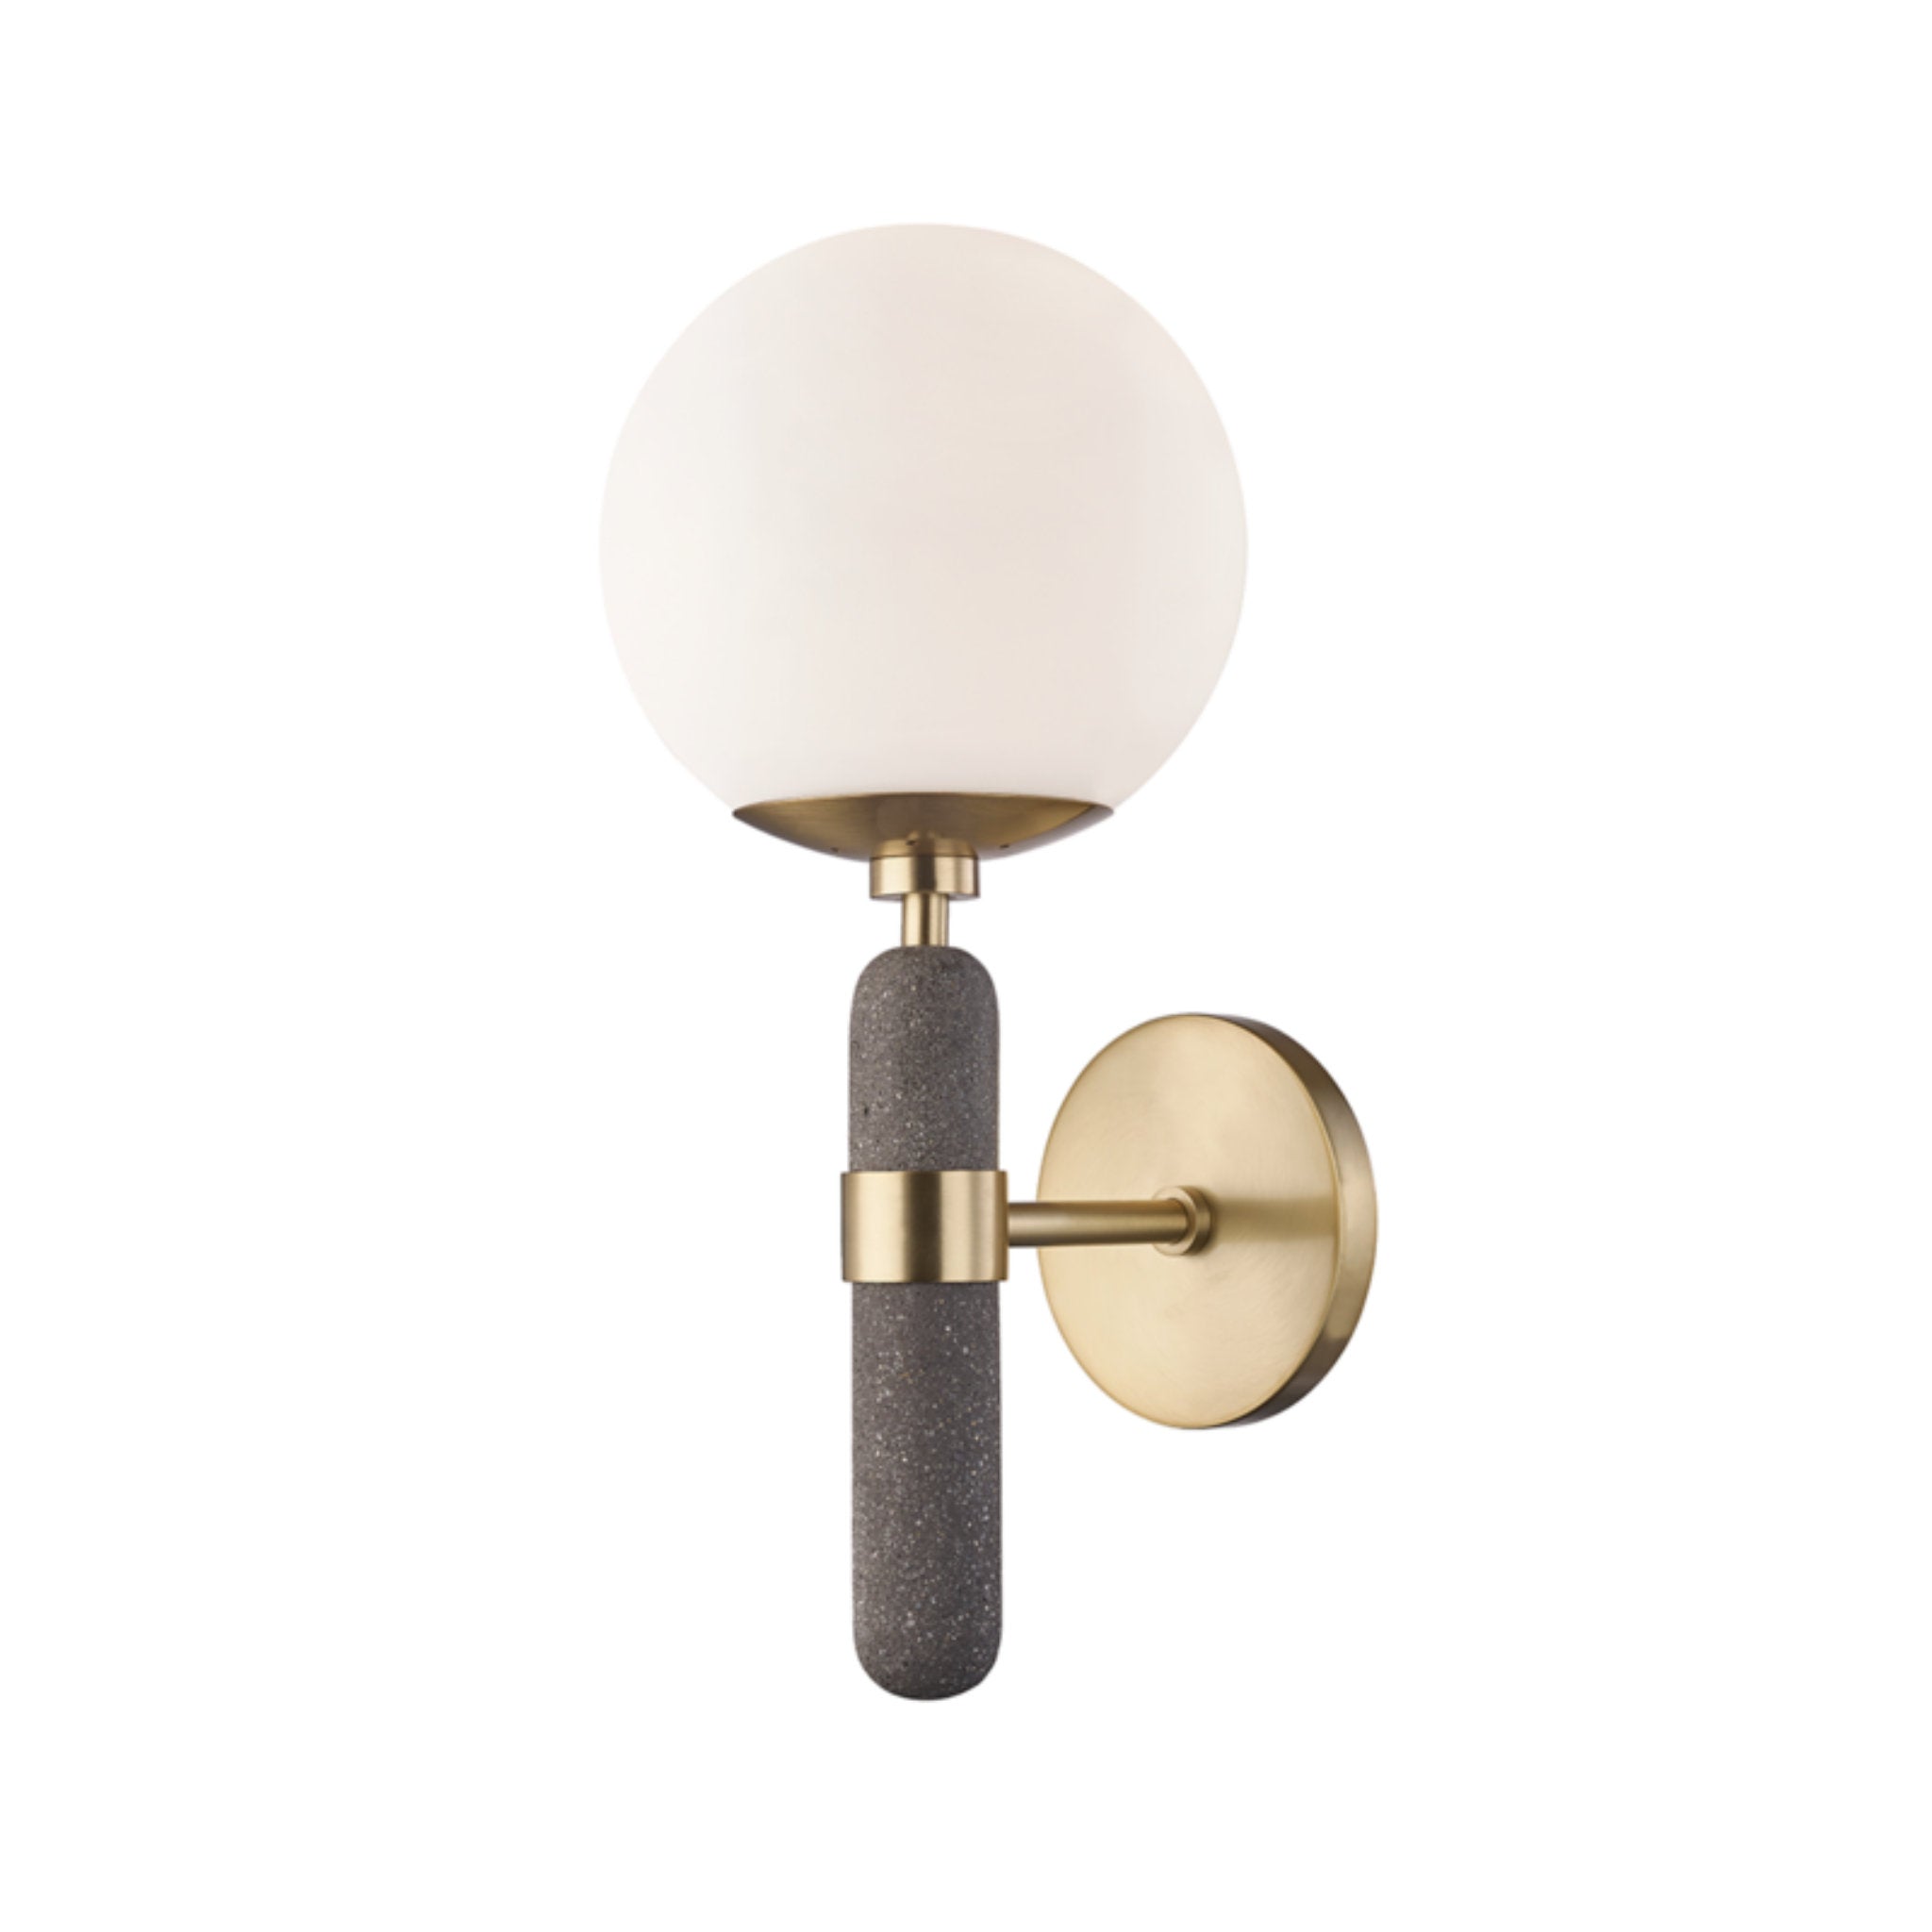 Brielle 1-Light Wall Sconce in Aged Brass